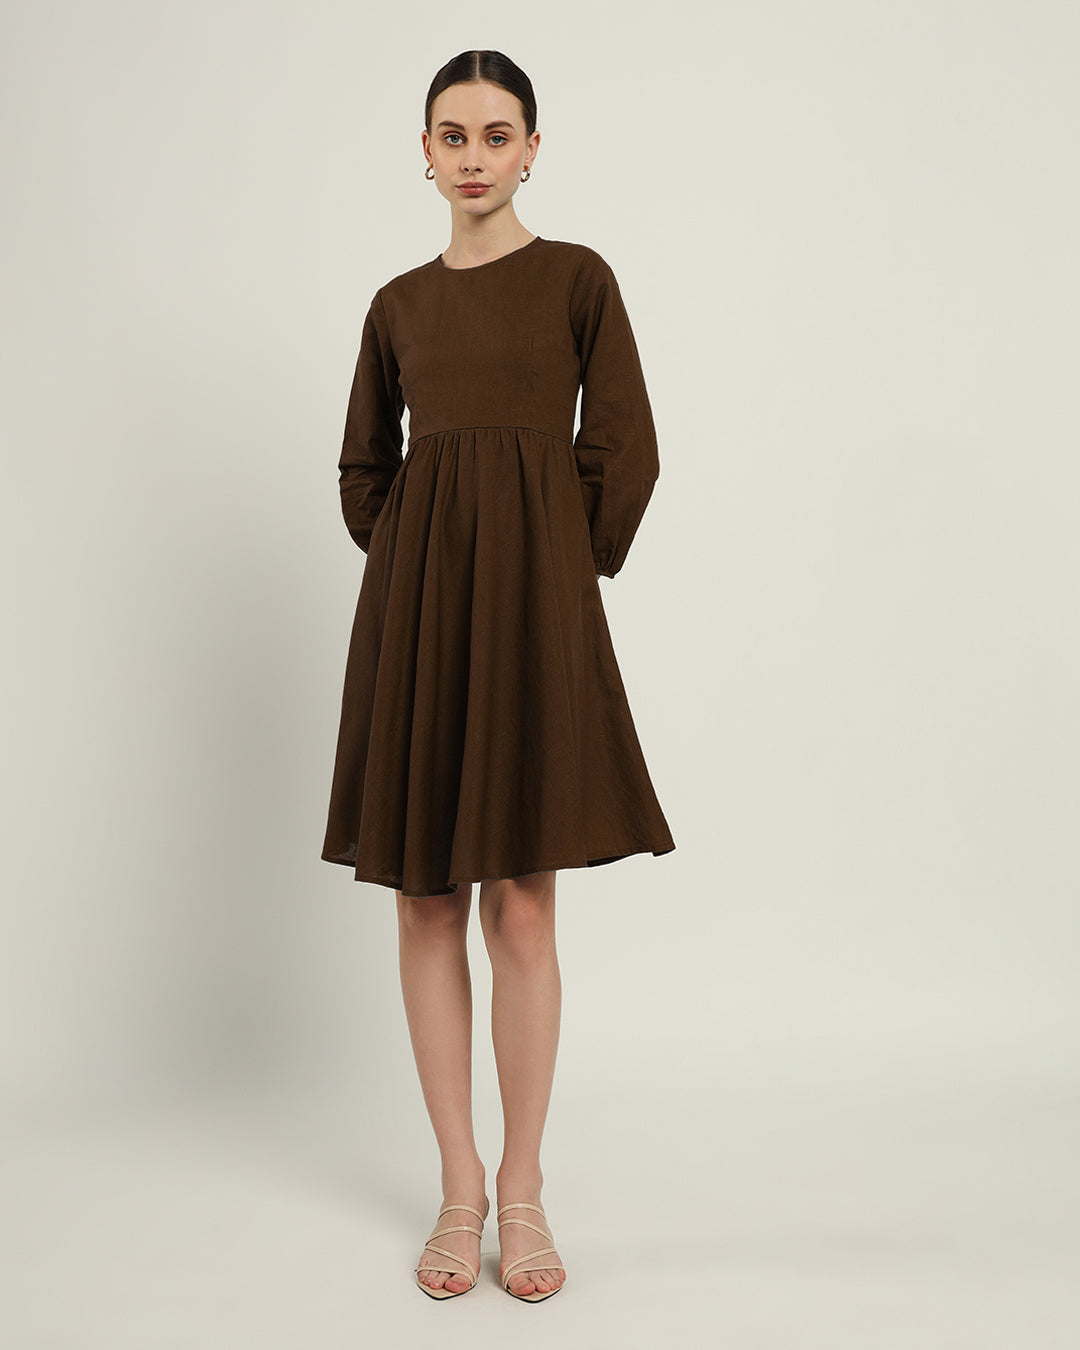 The Exeter Nutshell Cotton Dress